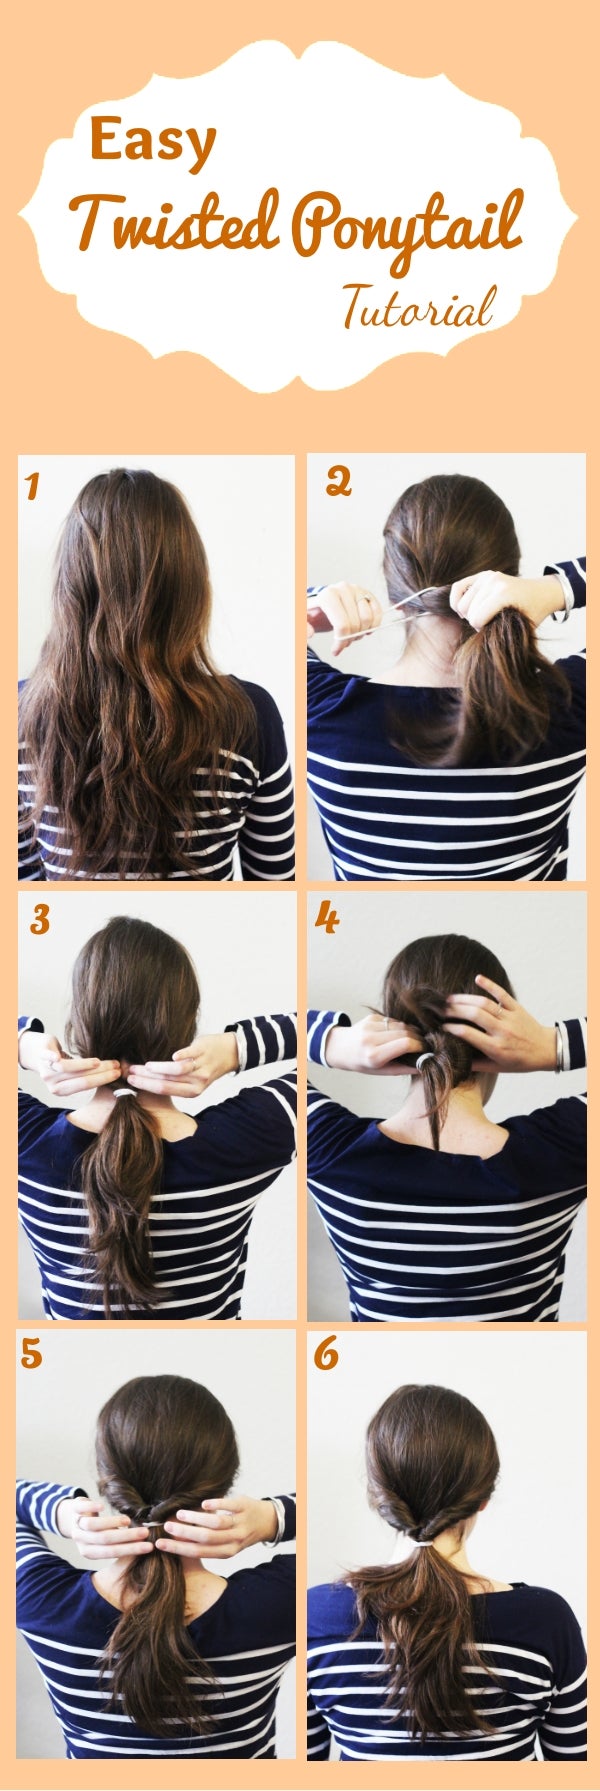 Easy twisted ponytail tutorial